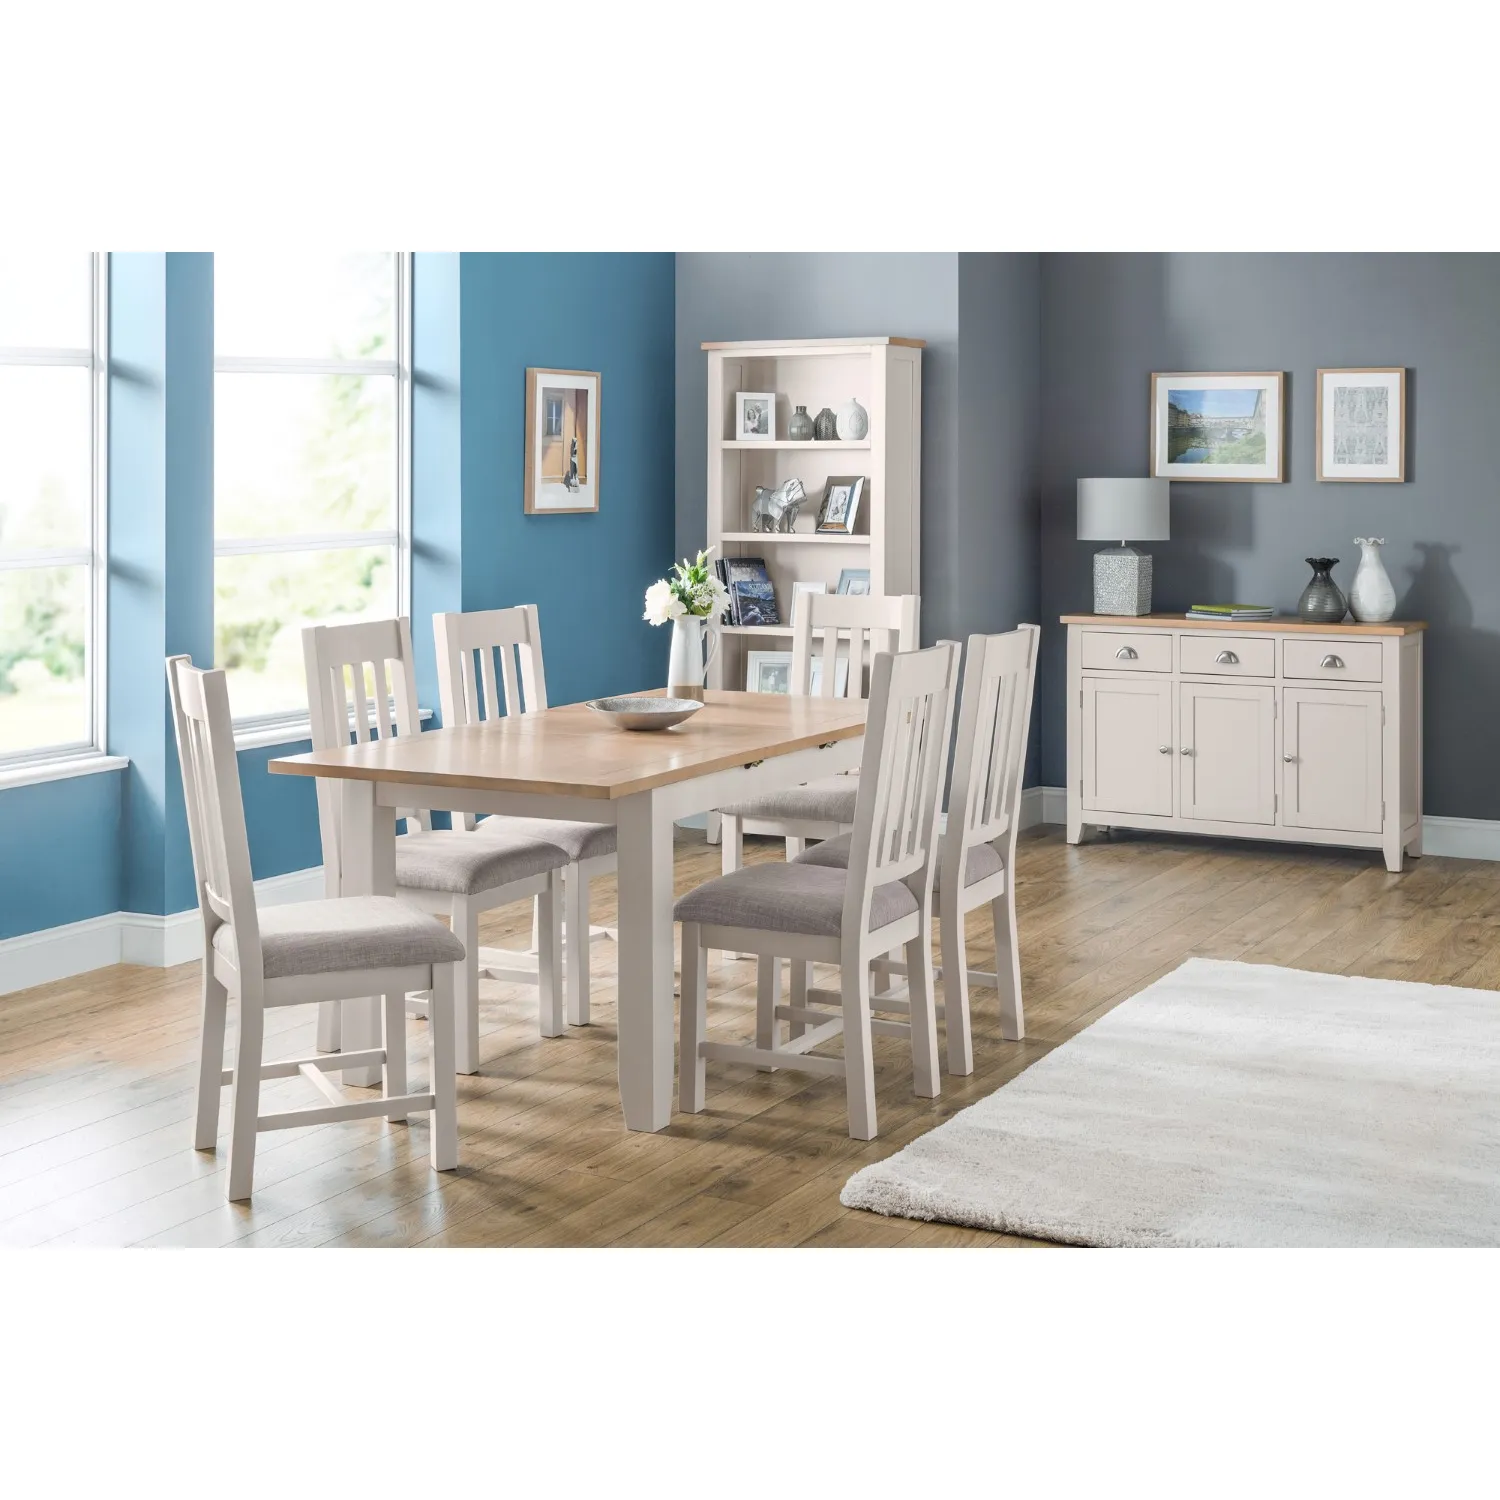 Elephant Grey Large Extending Kitchen Dining Room Table Pale Oak Top 4 to 6 Seater